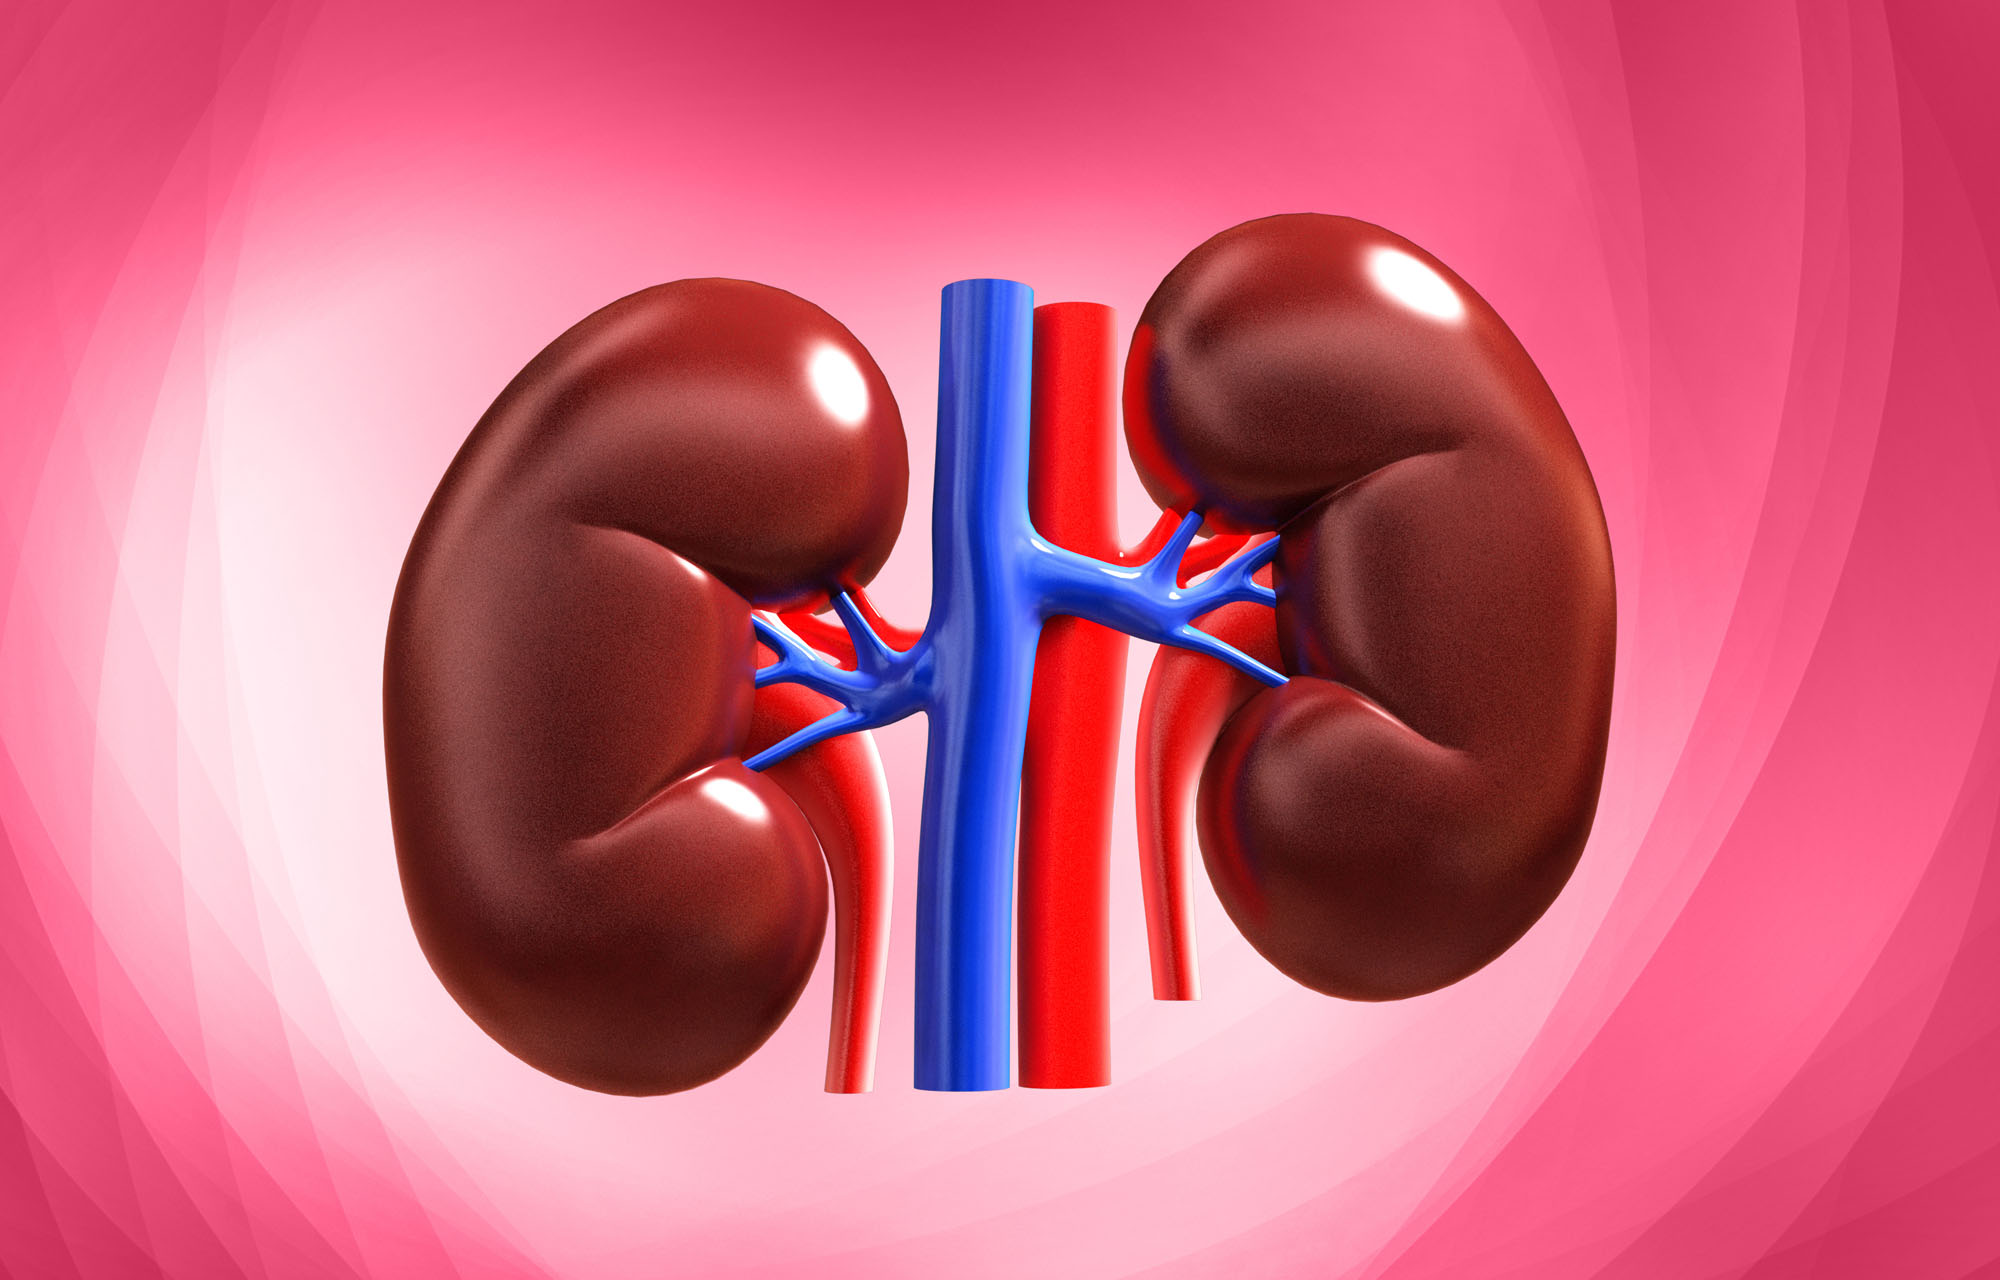 5 KIDNEY DAMAGING DRUGS YOU SHOULD AVOID TAKING WITHOUT DOCTOR’S PRESCRIPTION